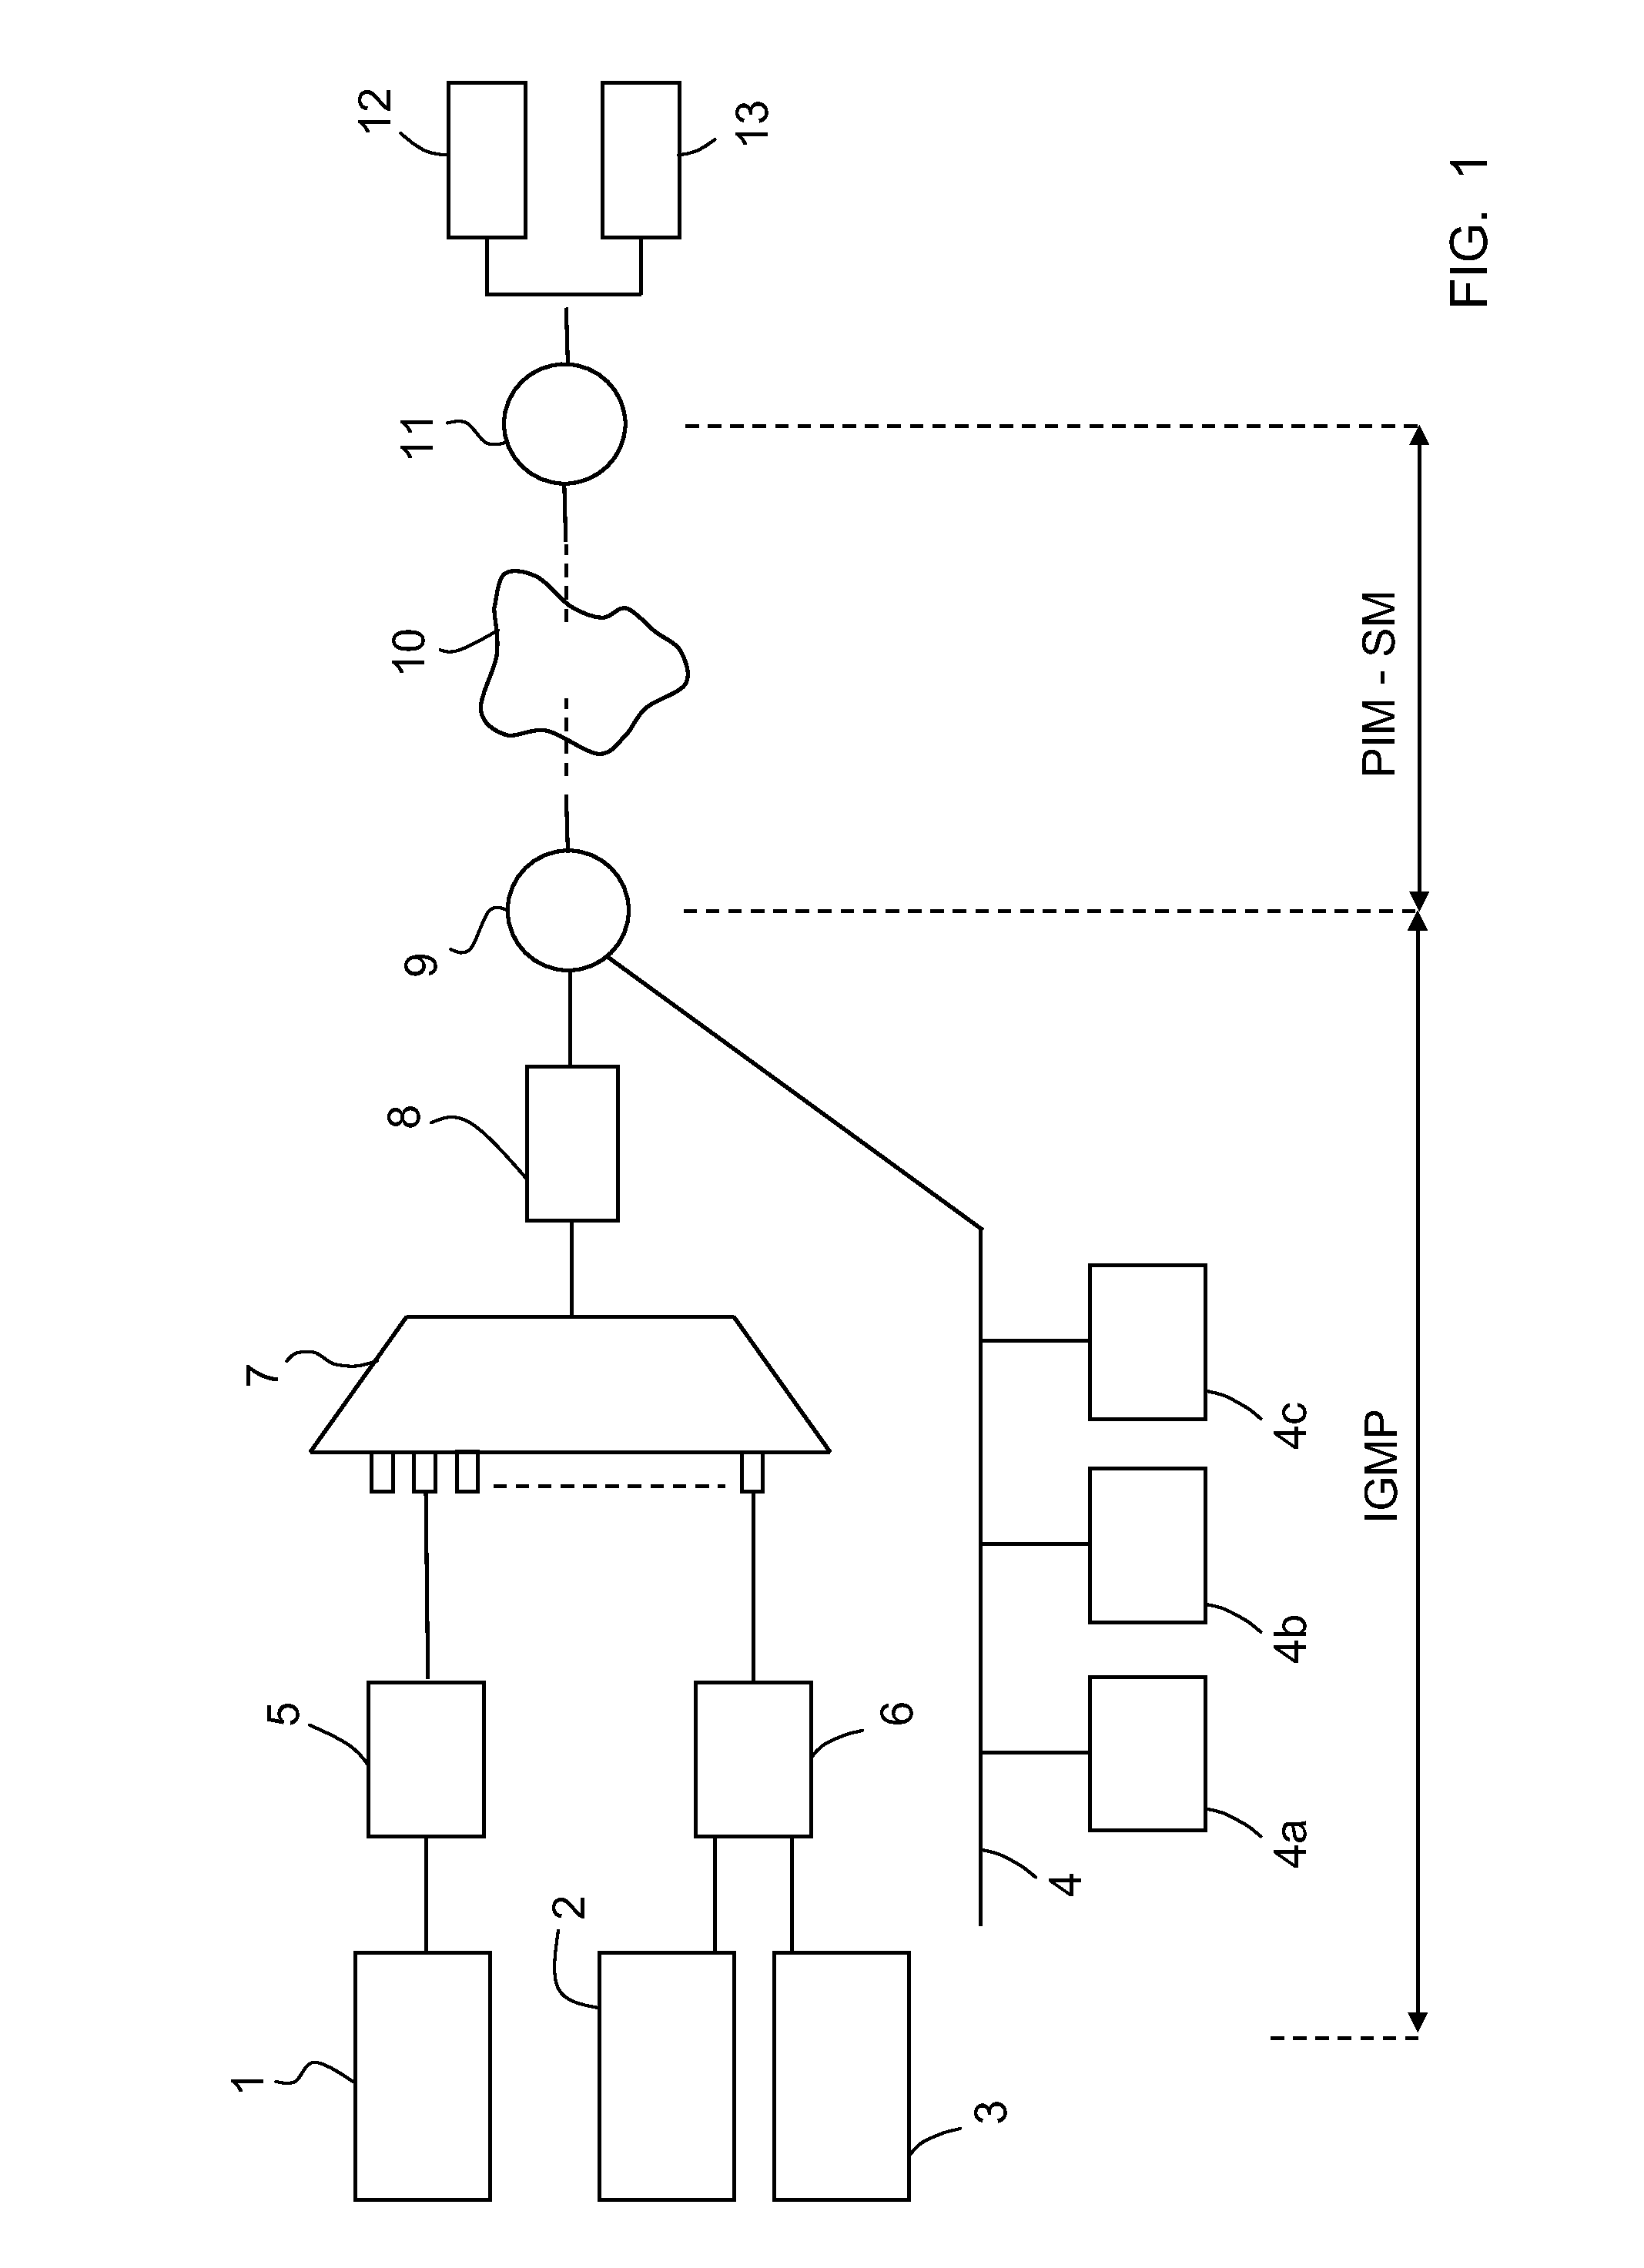 Methods for managing multicast traffic between sources sending data and hosts requesting data and network equipment used to implement the methods